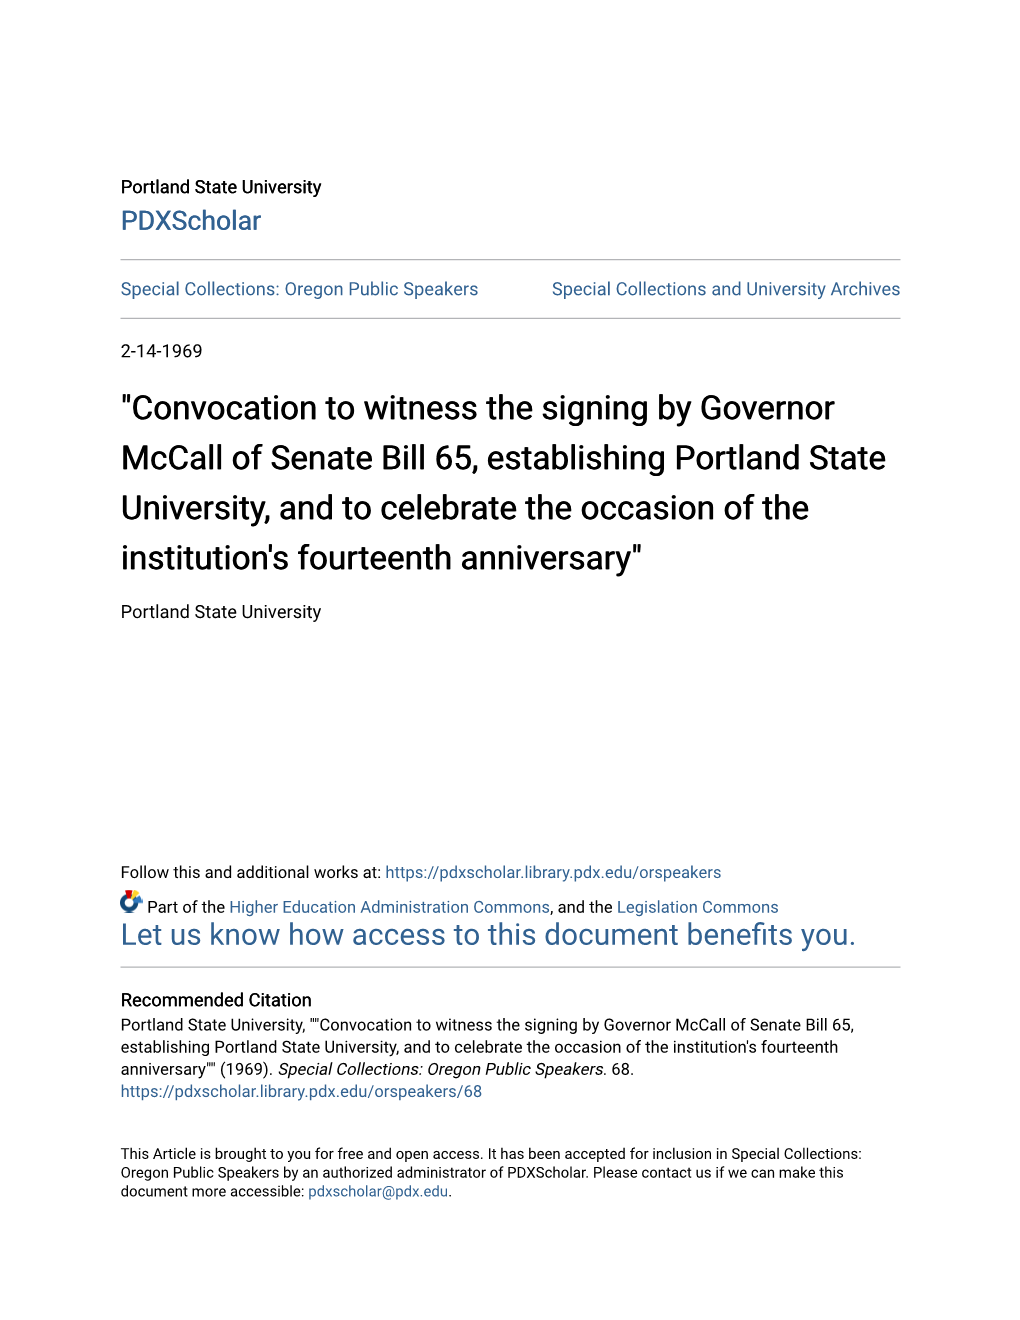 Convocation to Witness the Signing by Governor Mccall Of